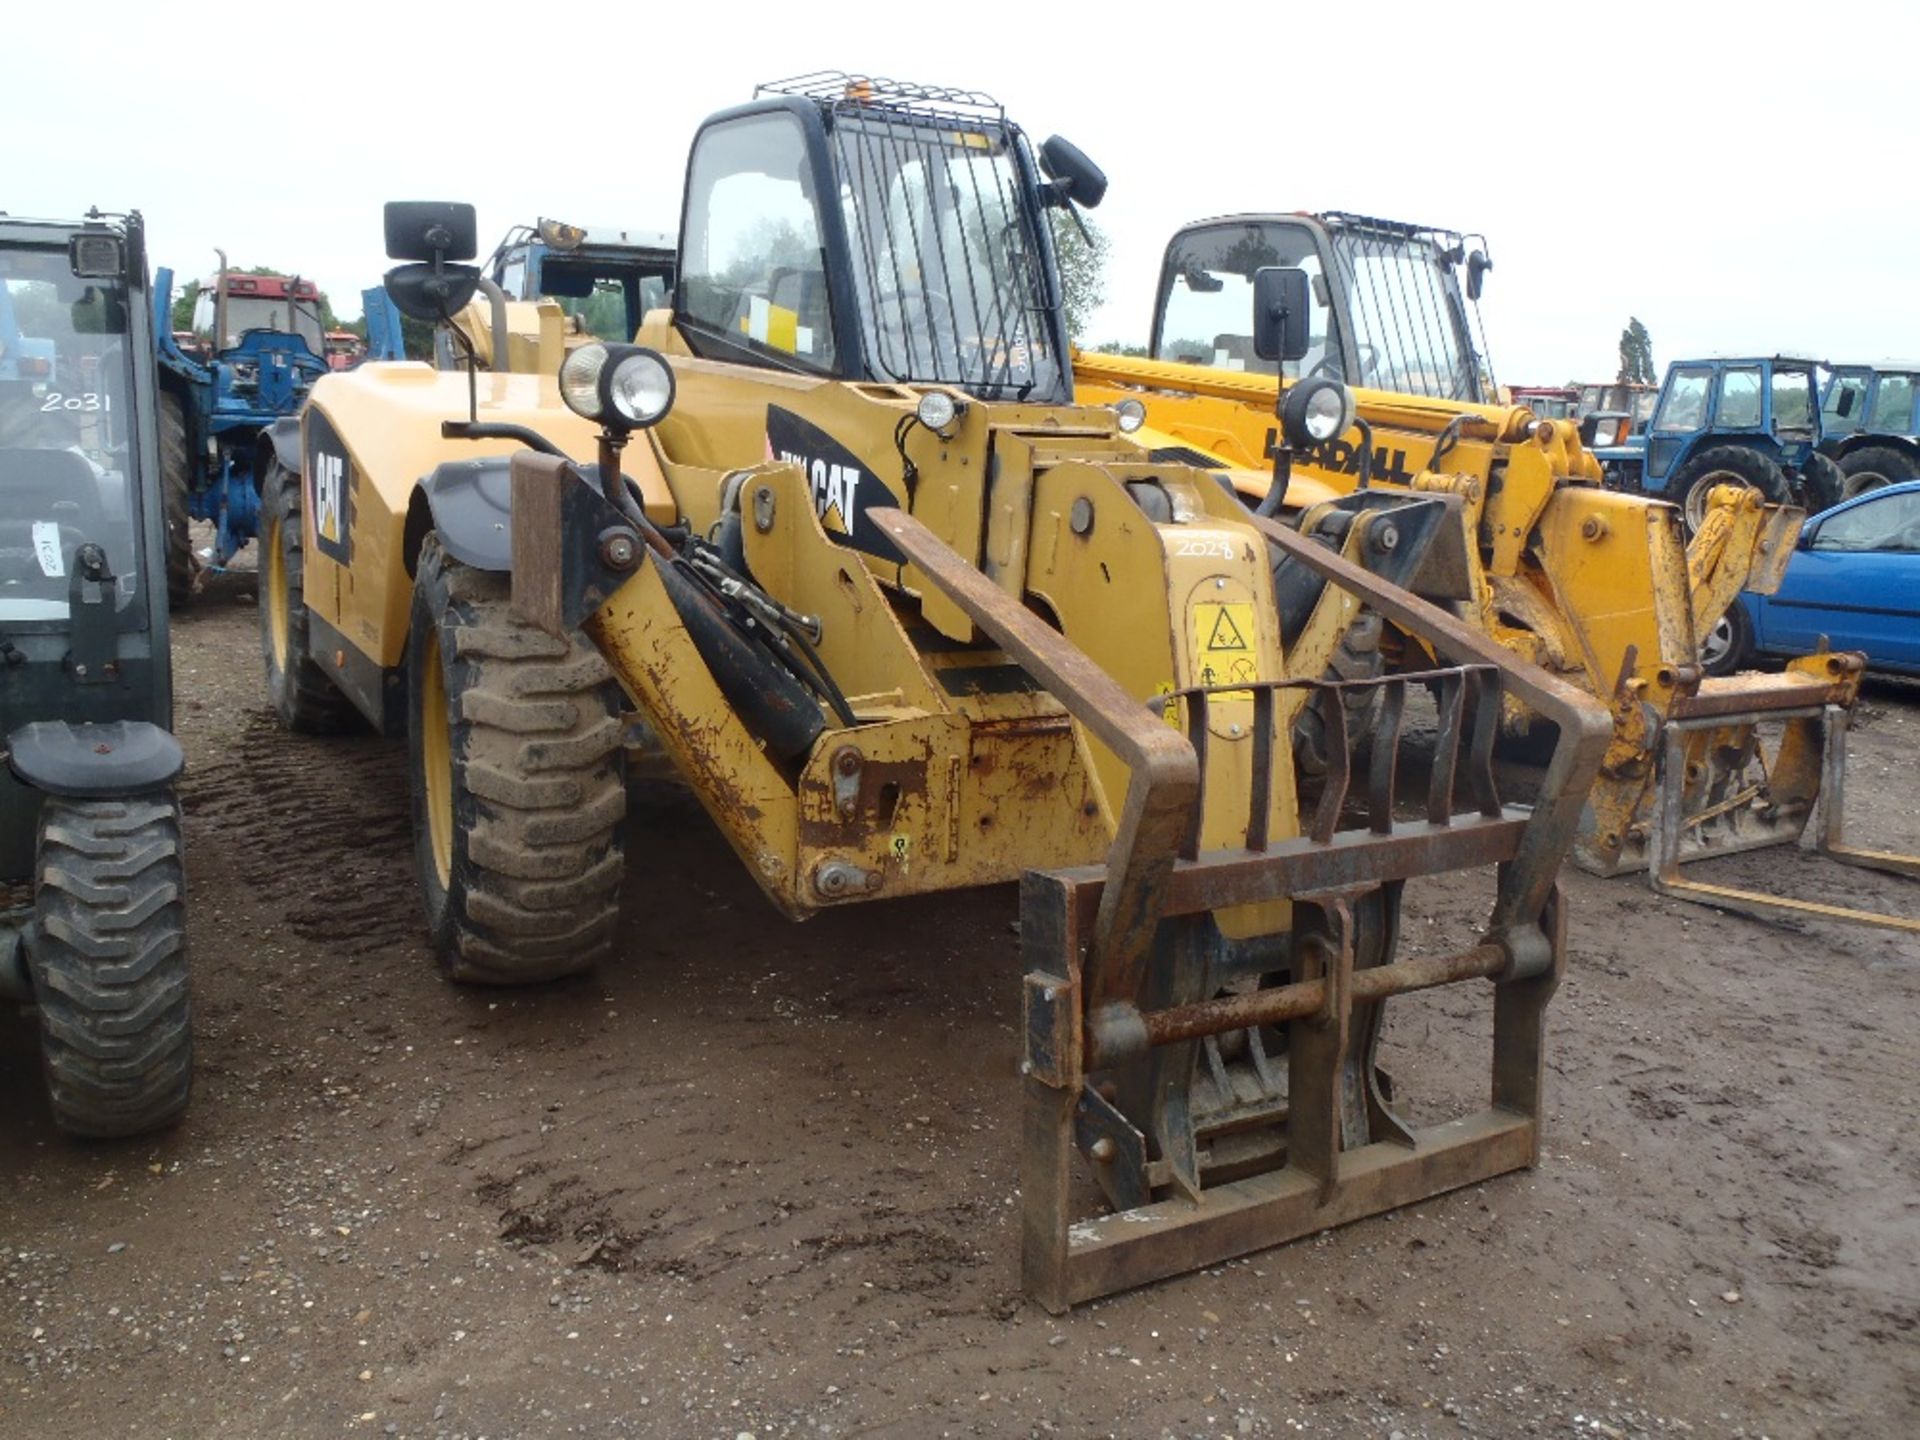 Caterpillar TH414 14m Telehandler. New set switches in office Ser. No. YC5000000TBZ00120 - Image 2 of 5